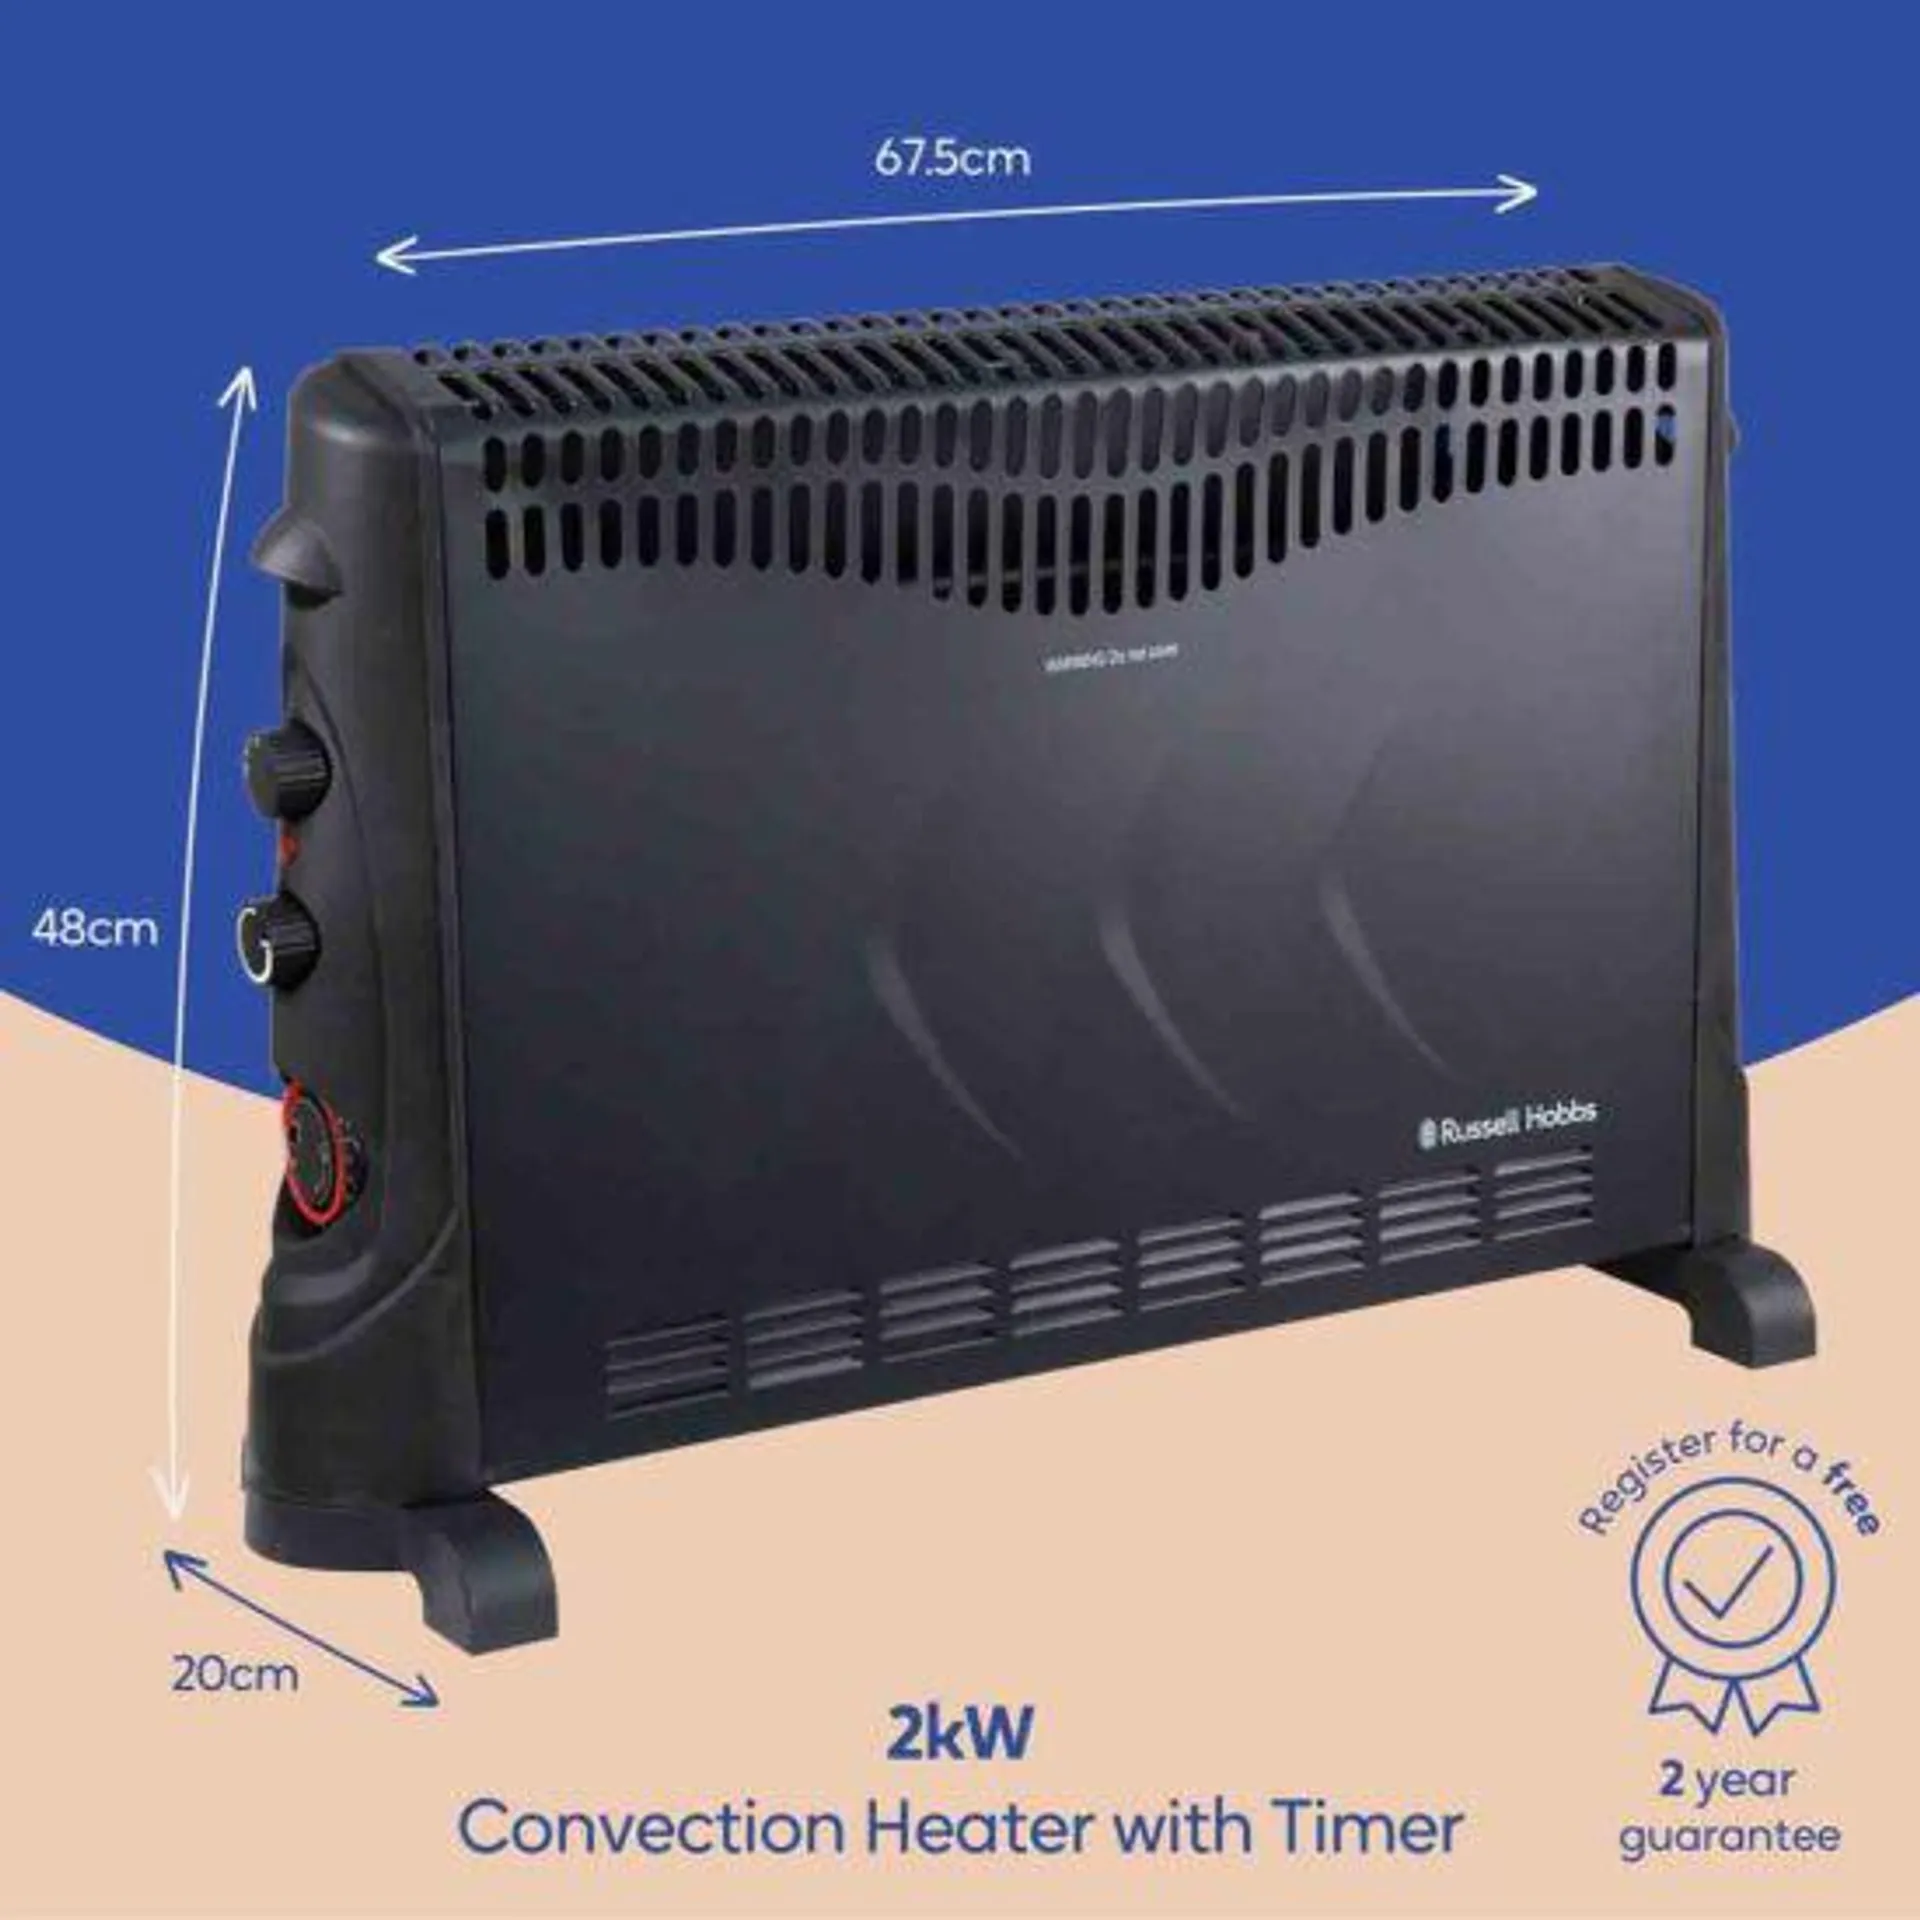 Russell Hobbs RHCVH4002B Black 2kW Convection Heater With Timer